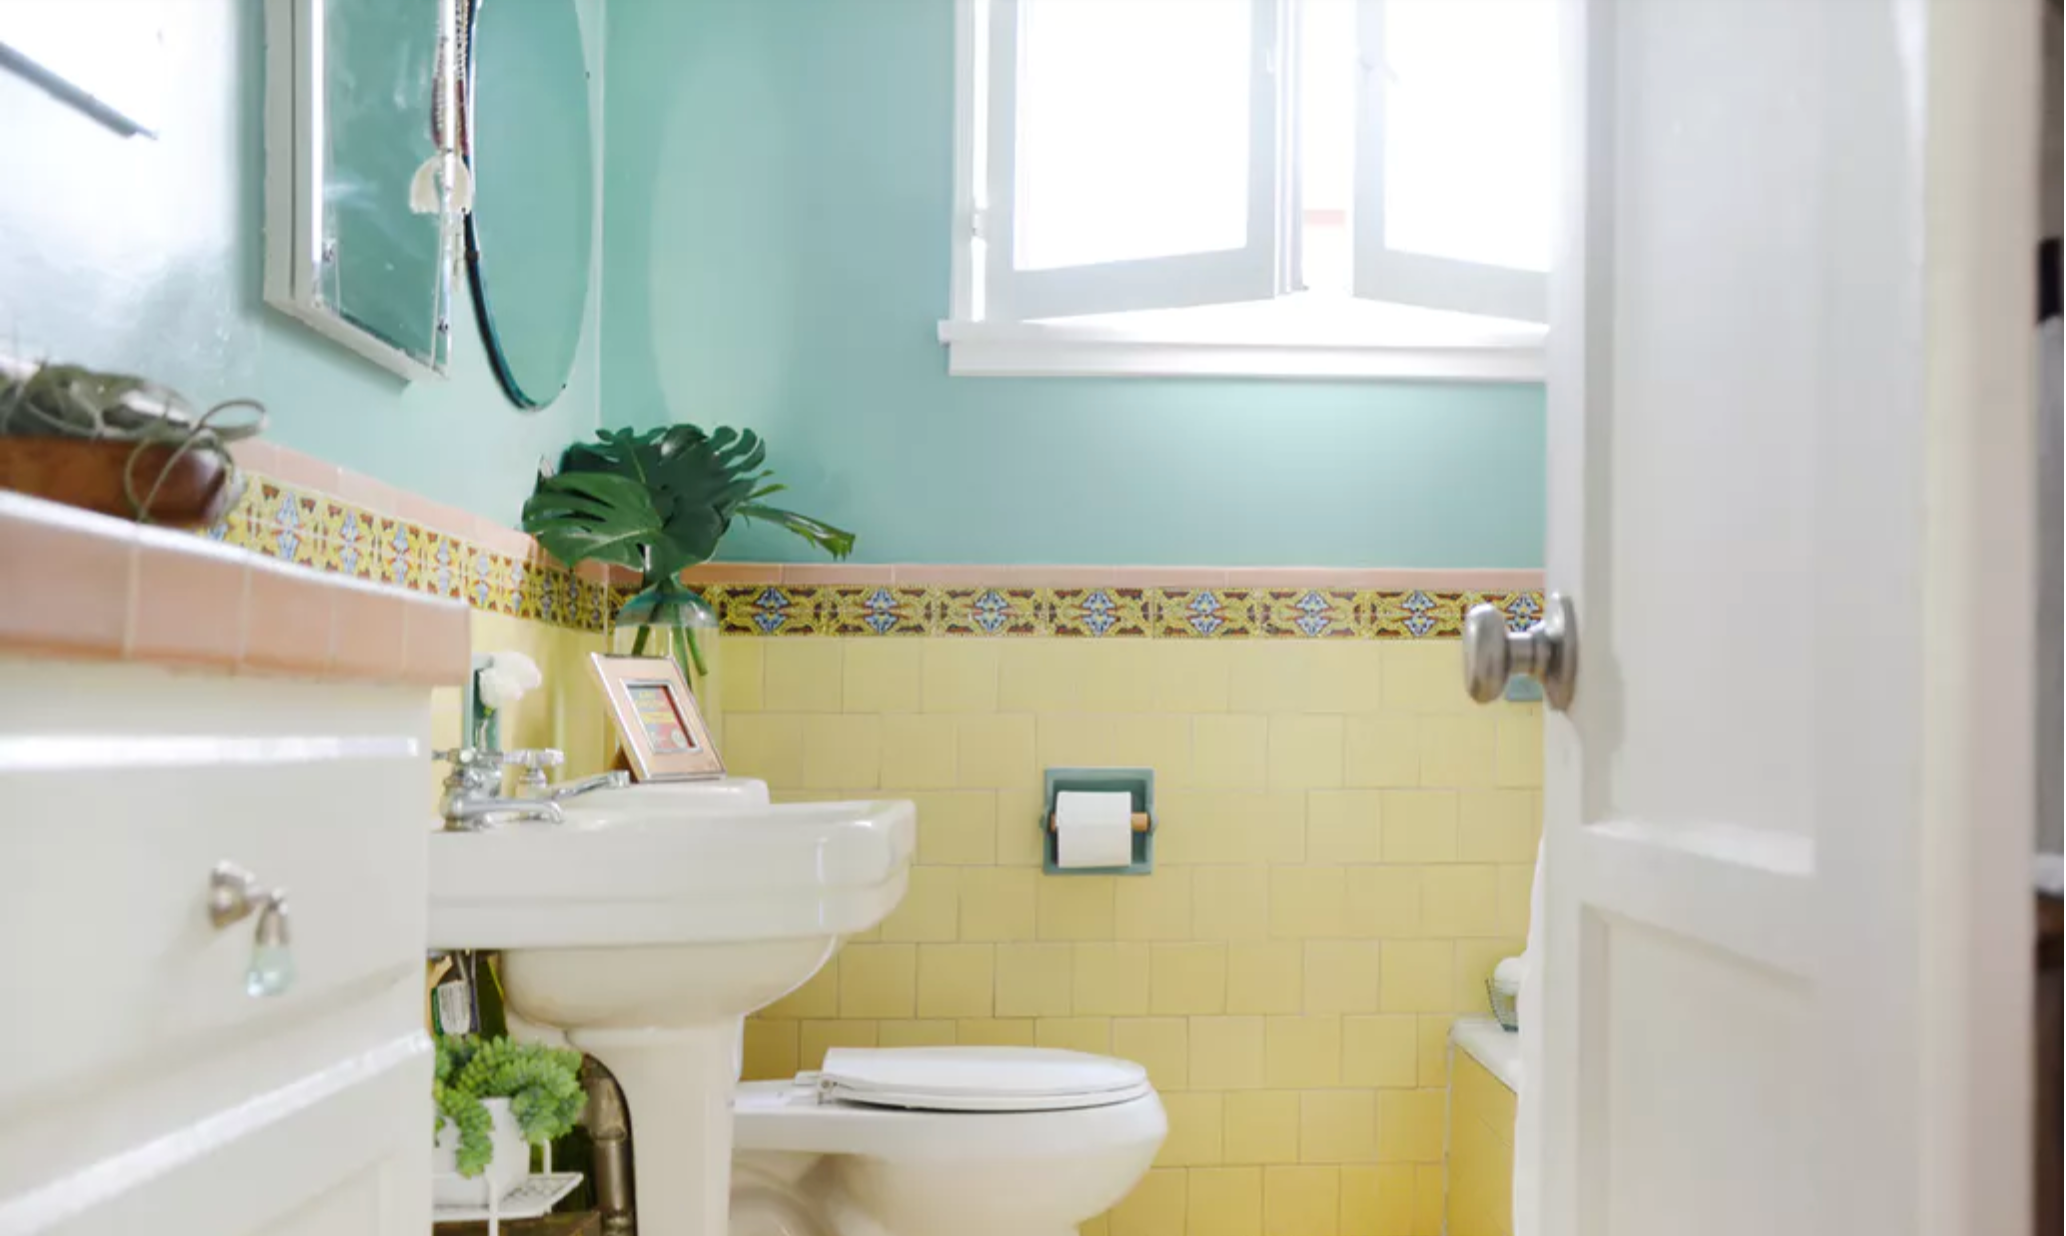 One Trick that Could Make Cleaning the Toilet Fun—Okay, Not Fun But At Least Not Awful